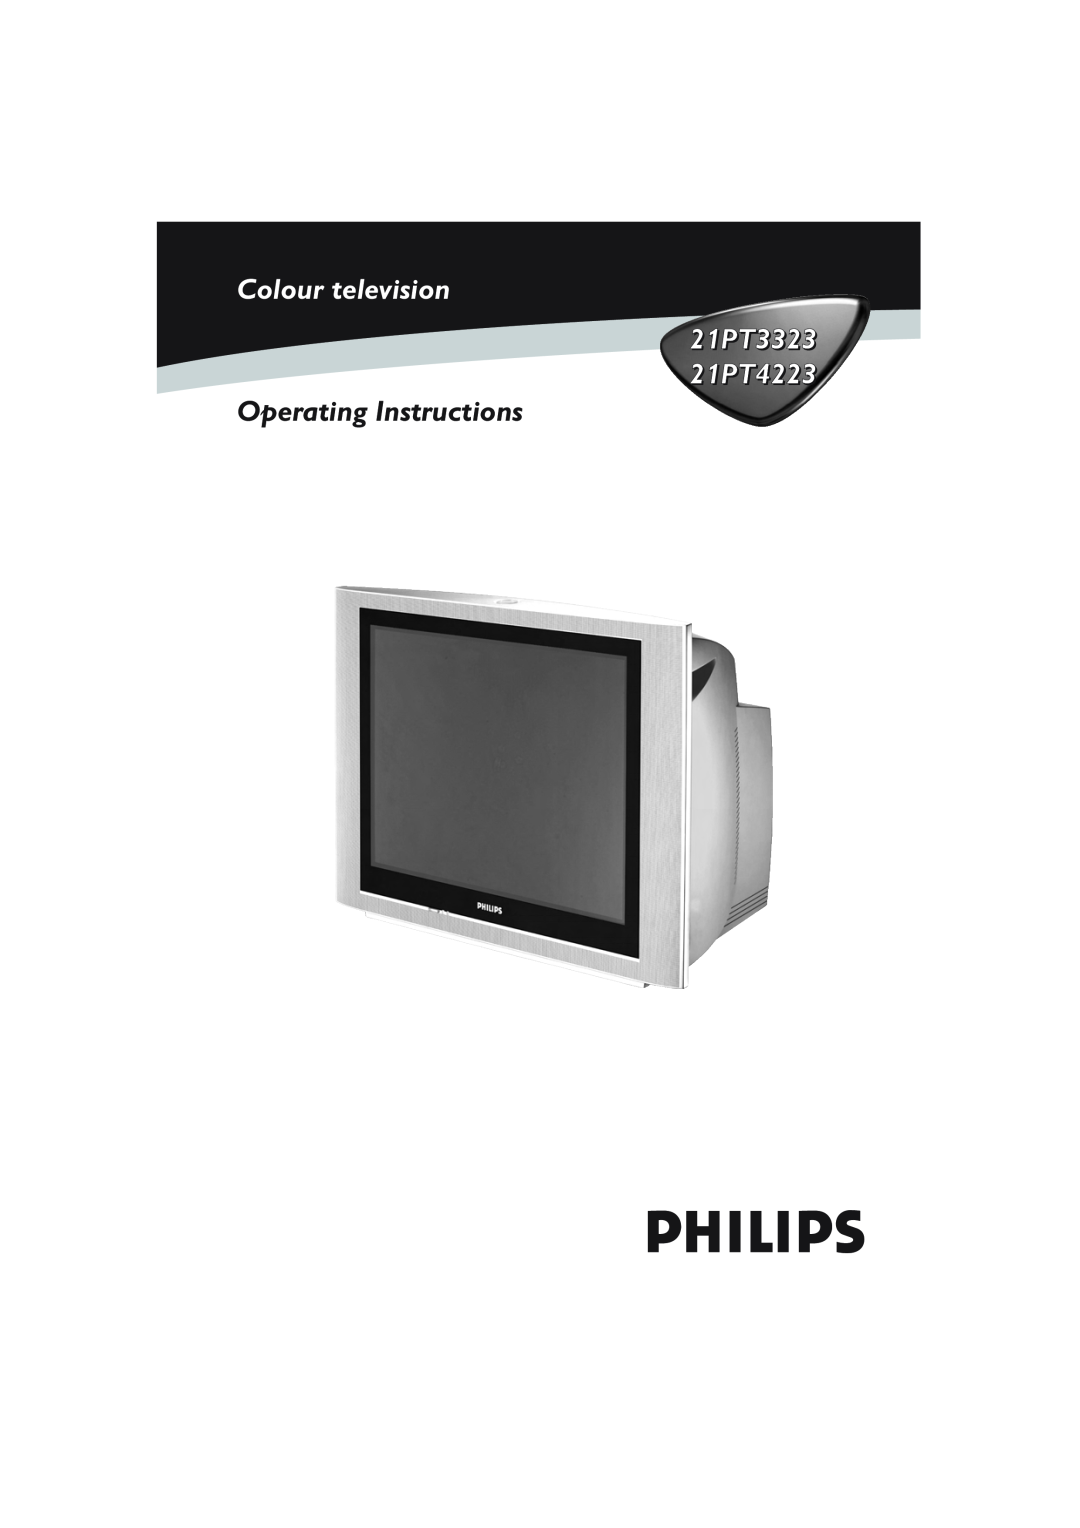 Philips operating instructions Colour television, 21PT3323 21PT4223 Operating Instructions 